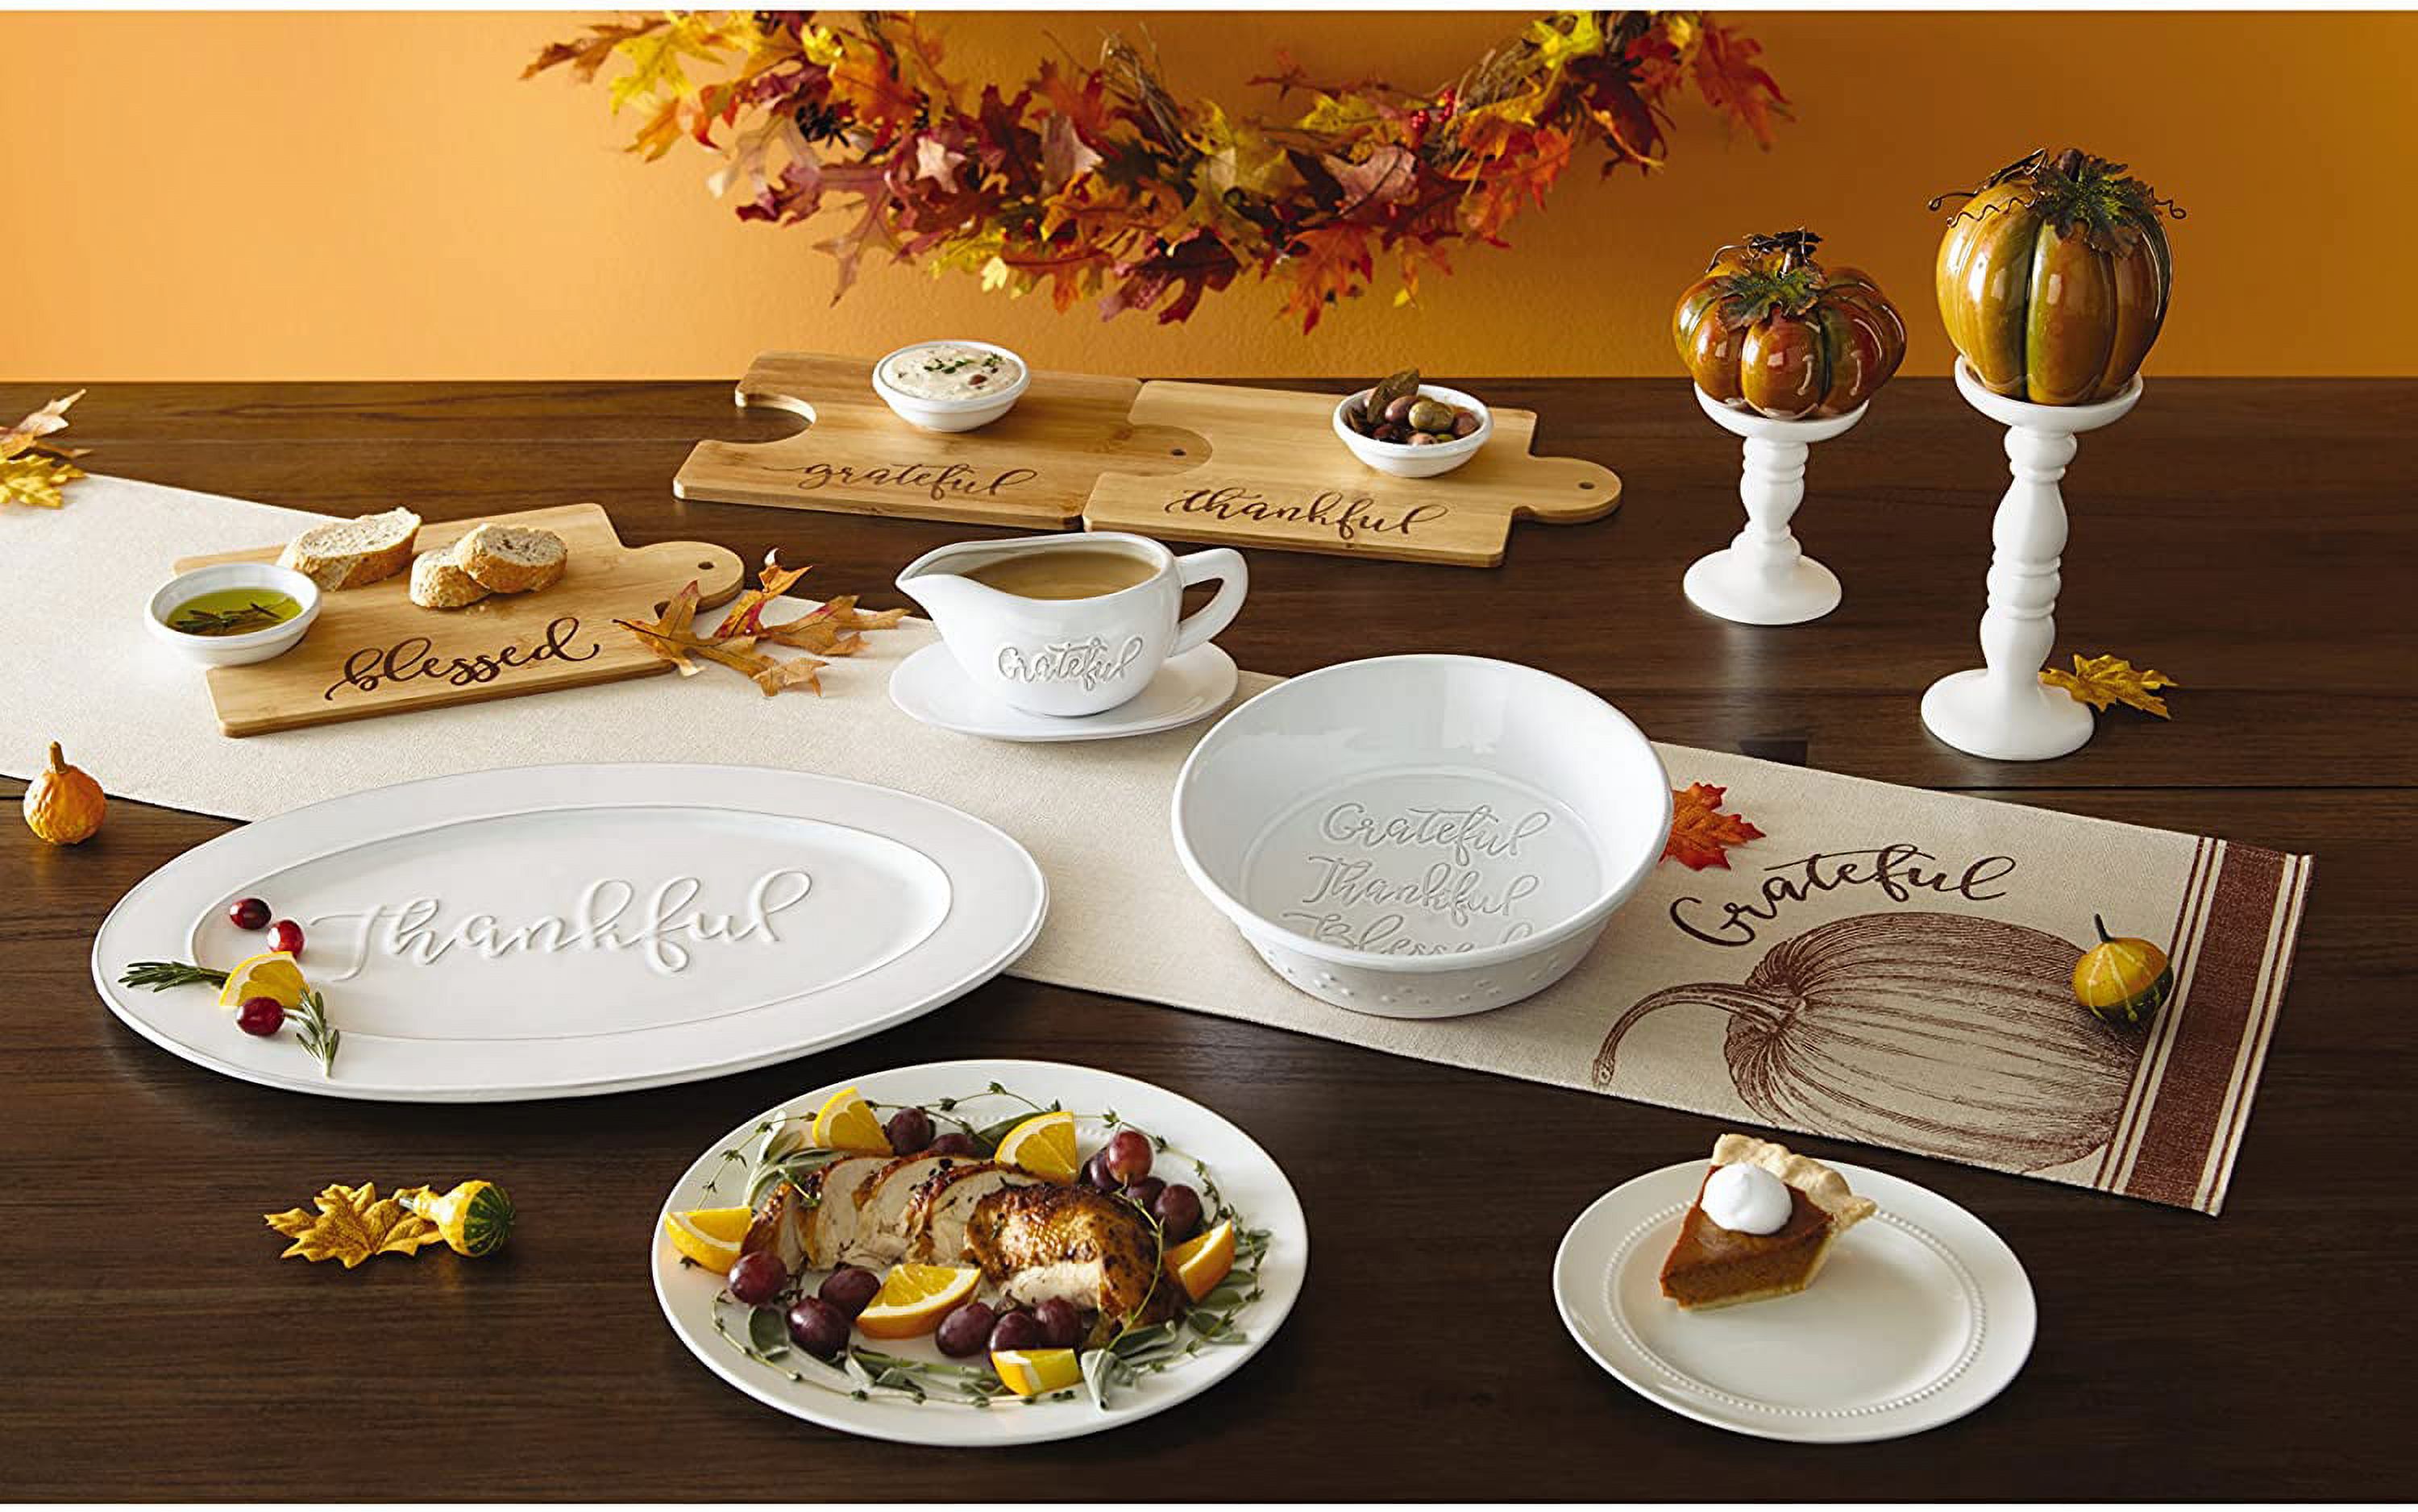 Bountiful Blessings by Precious Moments Thankful Ceramic Serving Platter White 18-inches by 12-inches - image 2 of 4